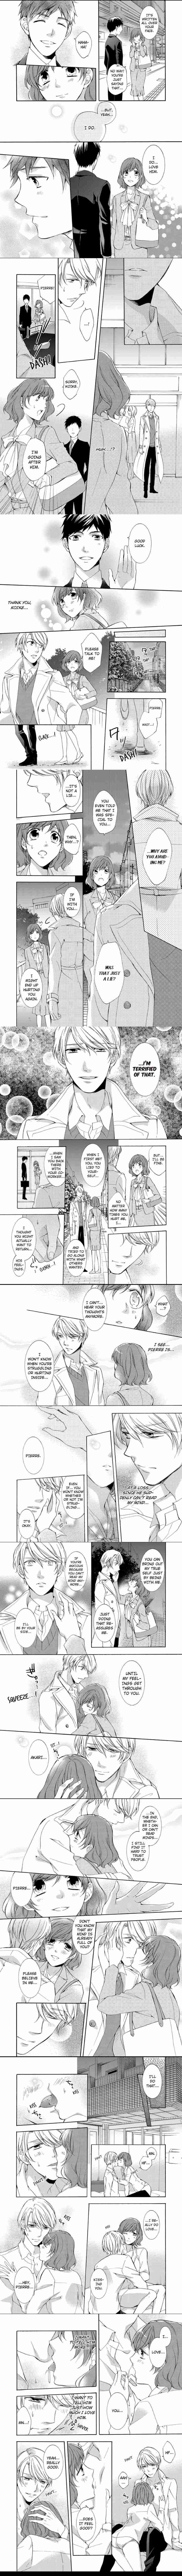 Pierre Takigawa Enjoys Making Me Melt / He can see right through me - Vol.1 Ch.5